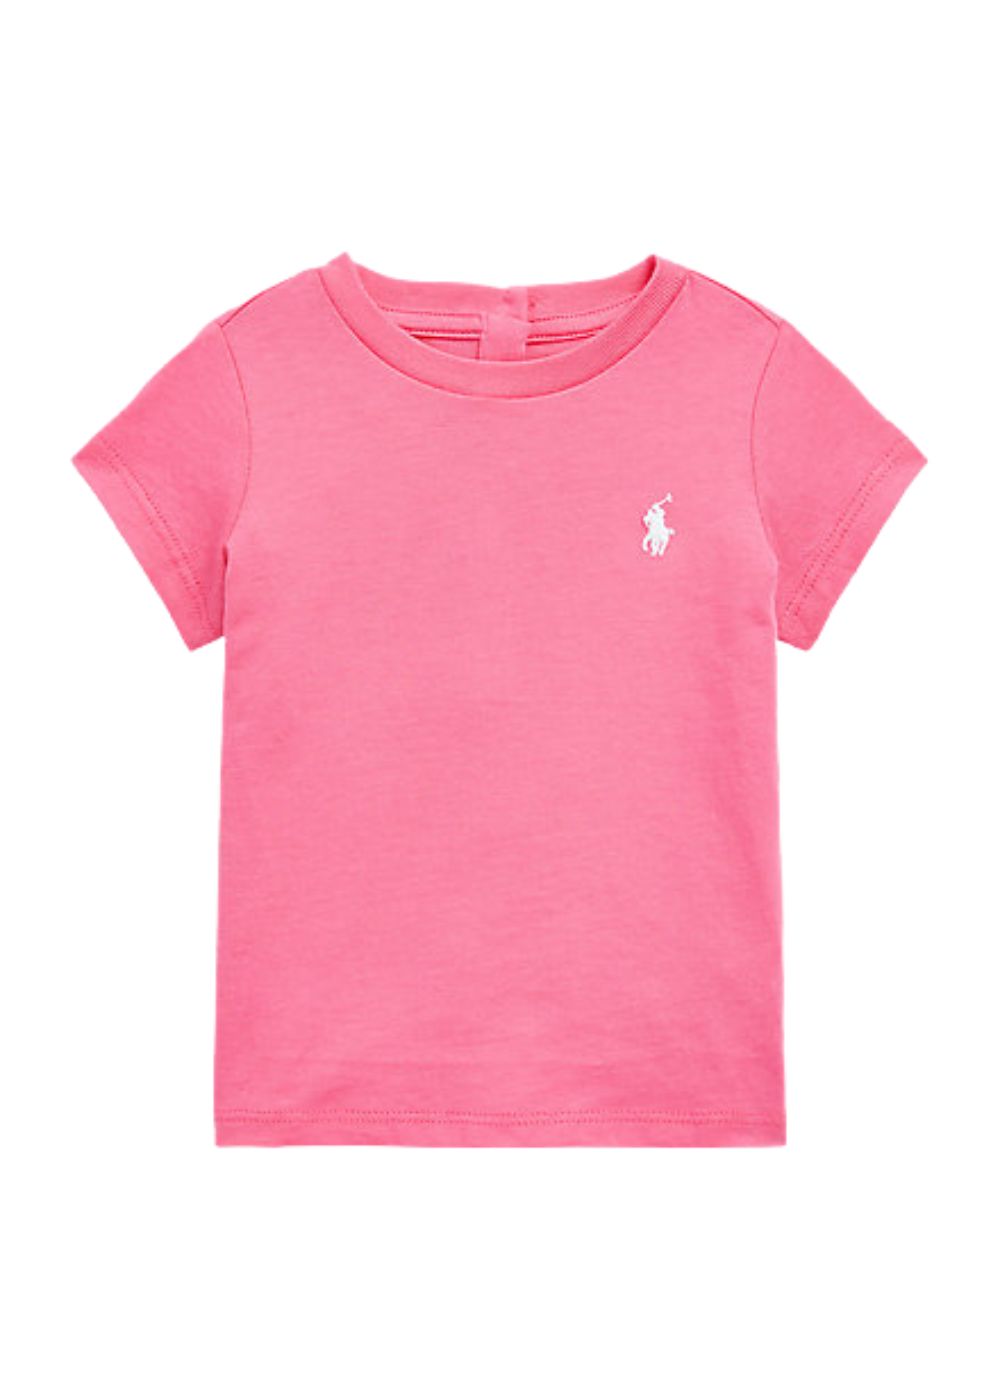 Featured image for “Polo Ralph Lauren T-shirt in cotone”